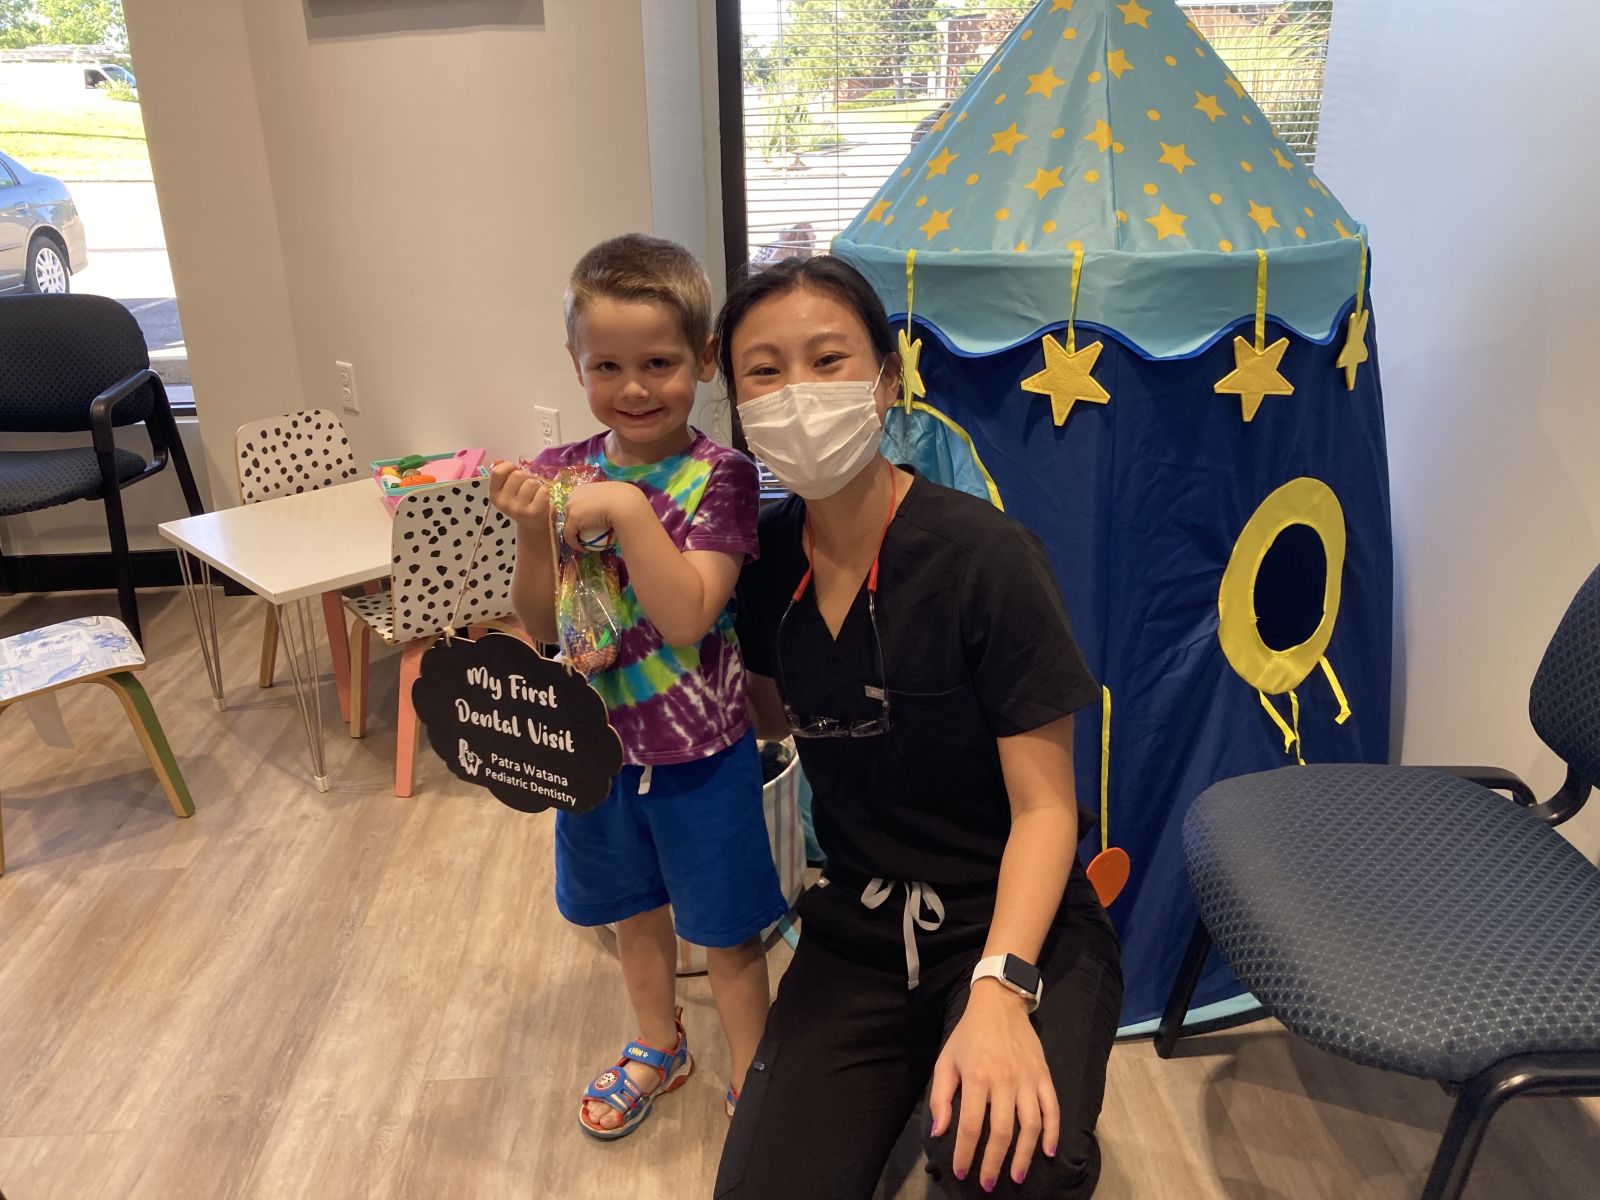 Dr Megan with patient for first visit